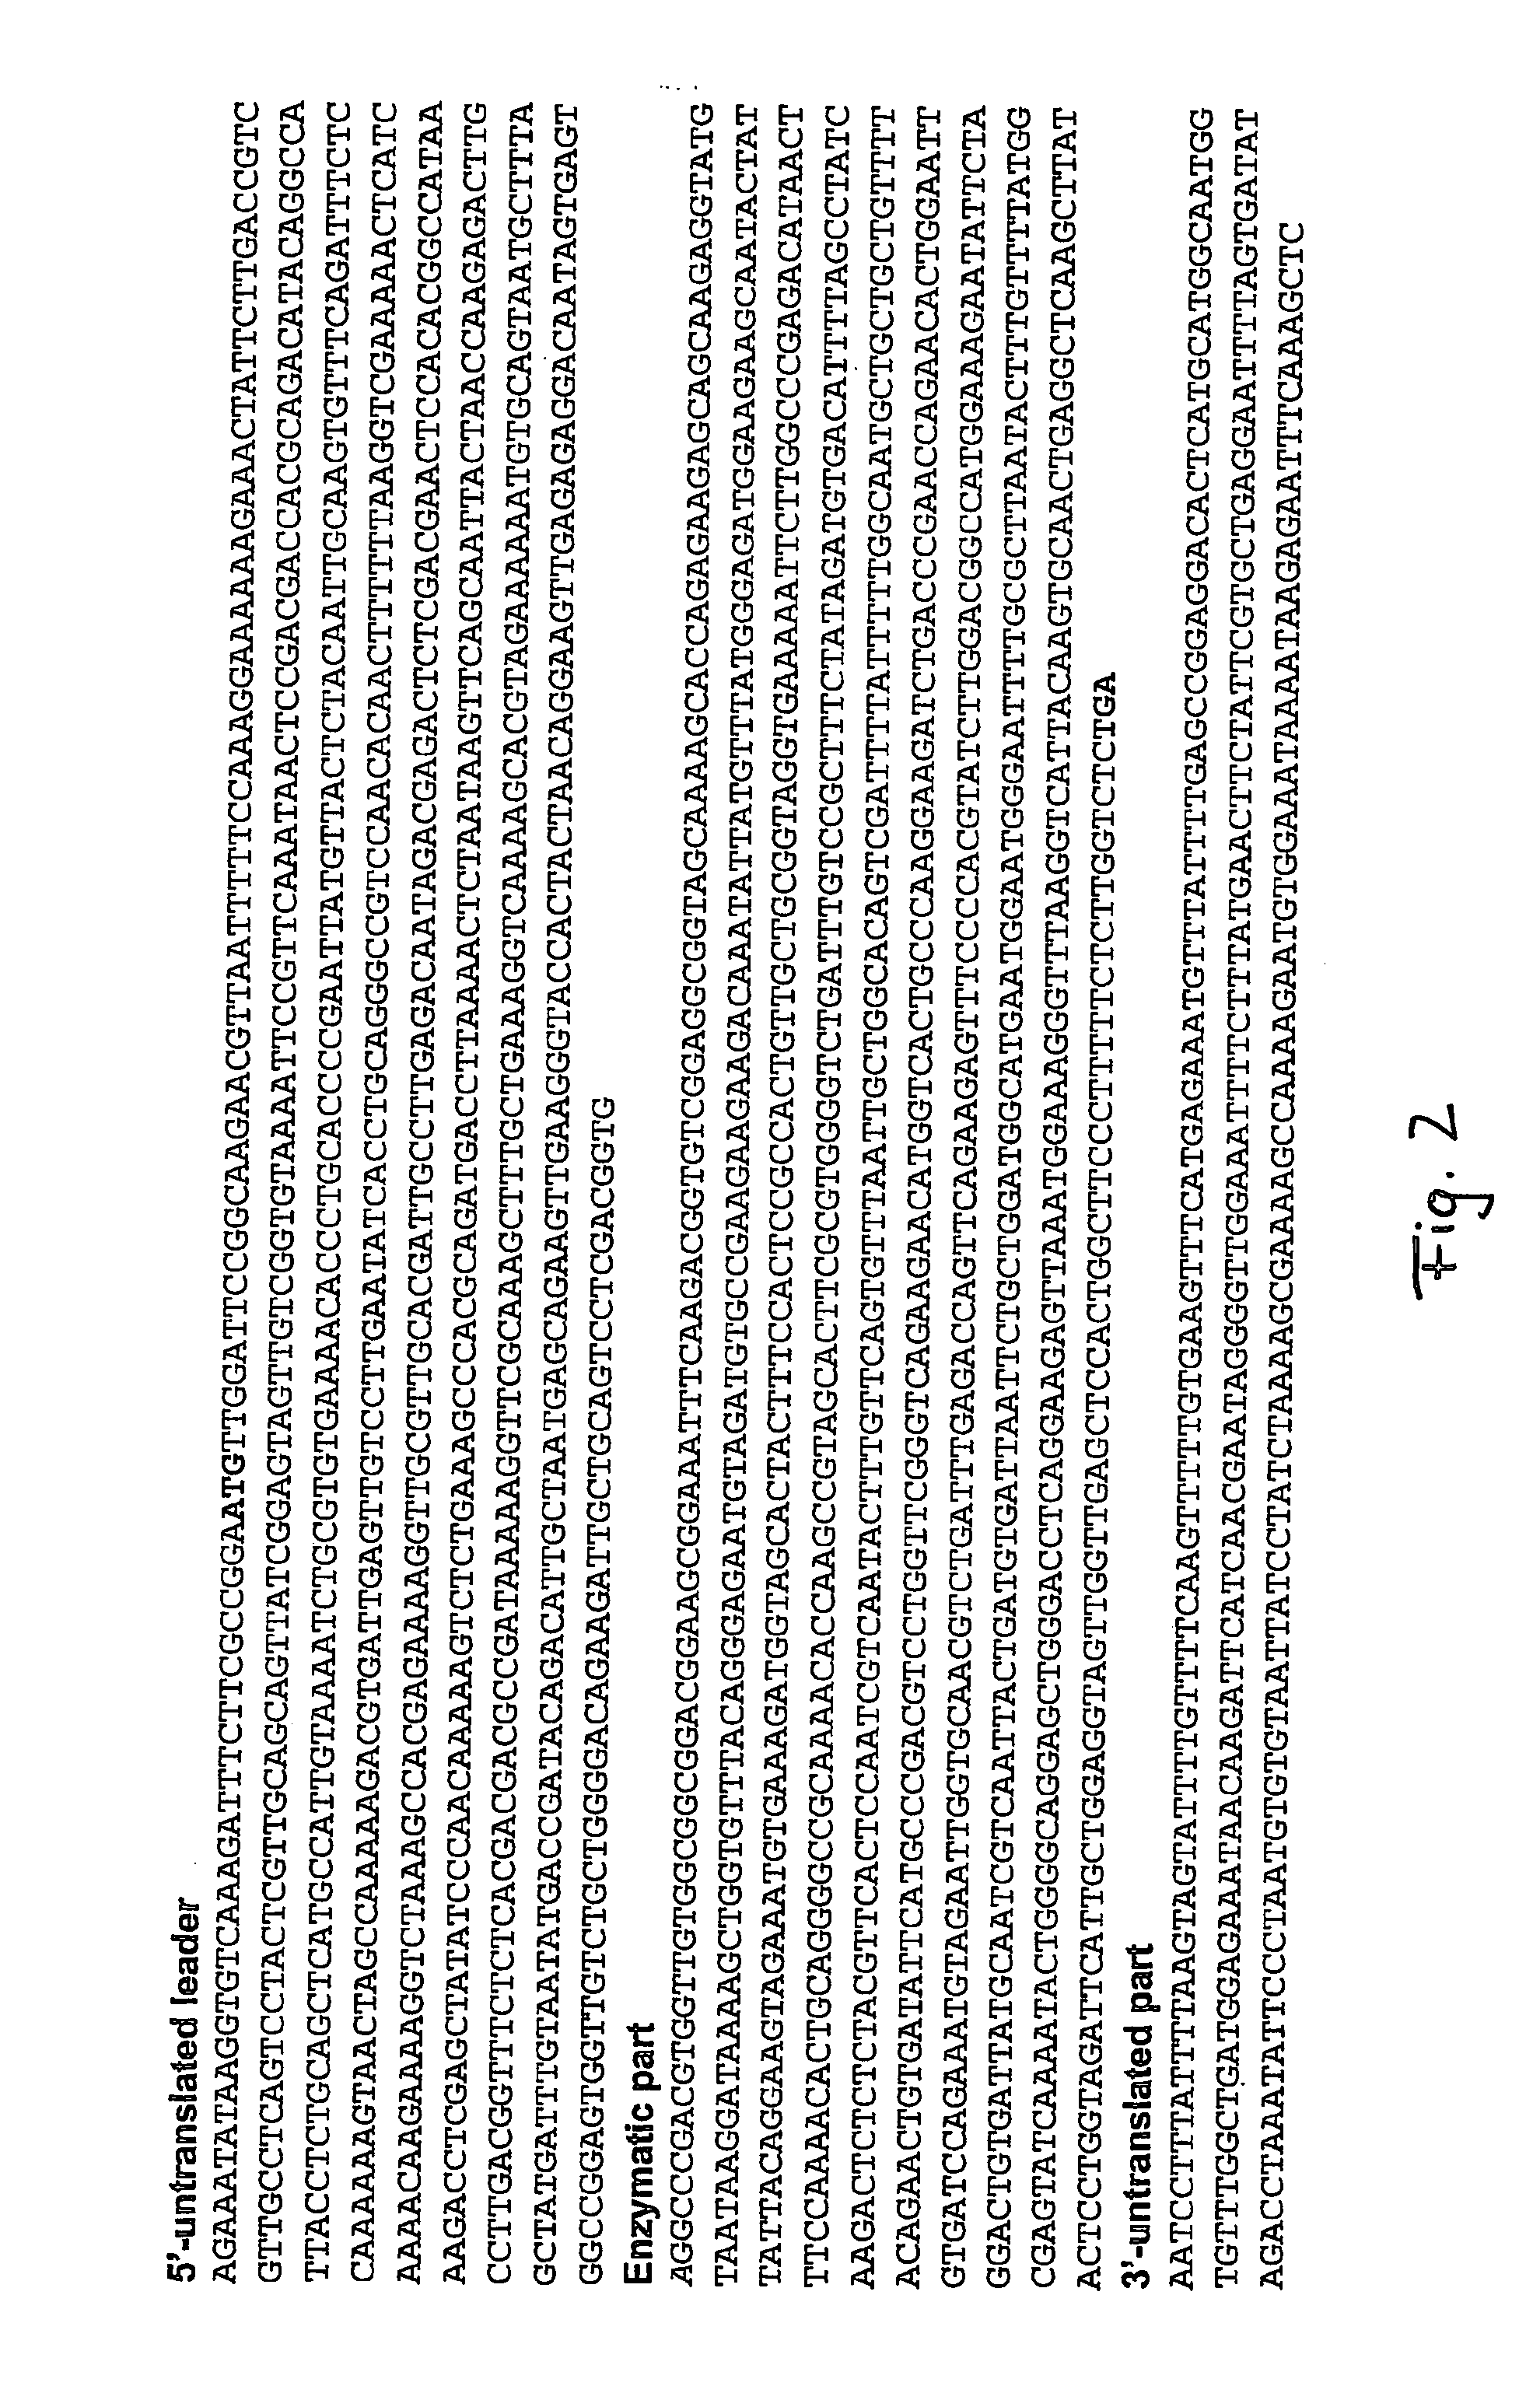 Method of protein production in plants